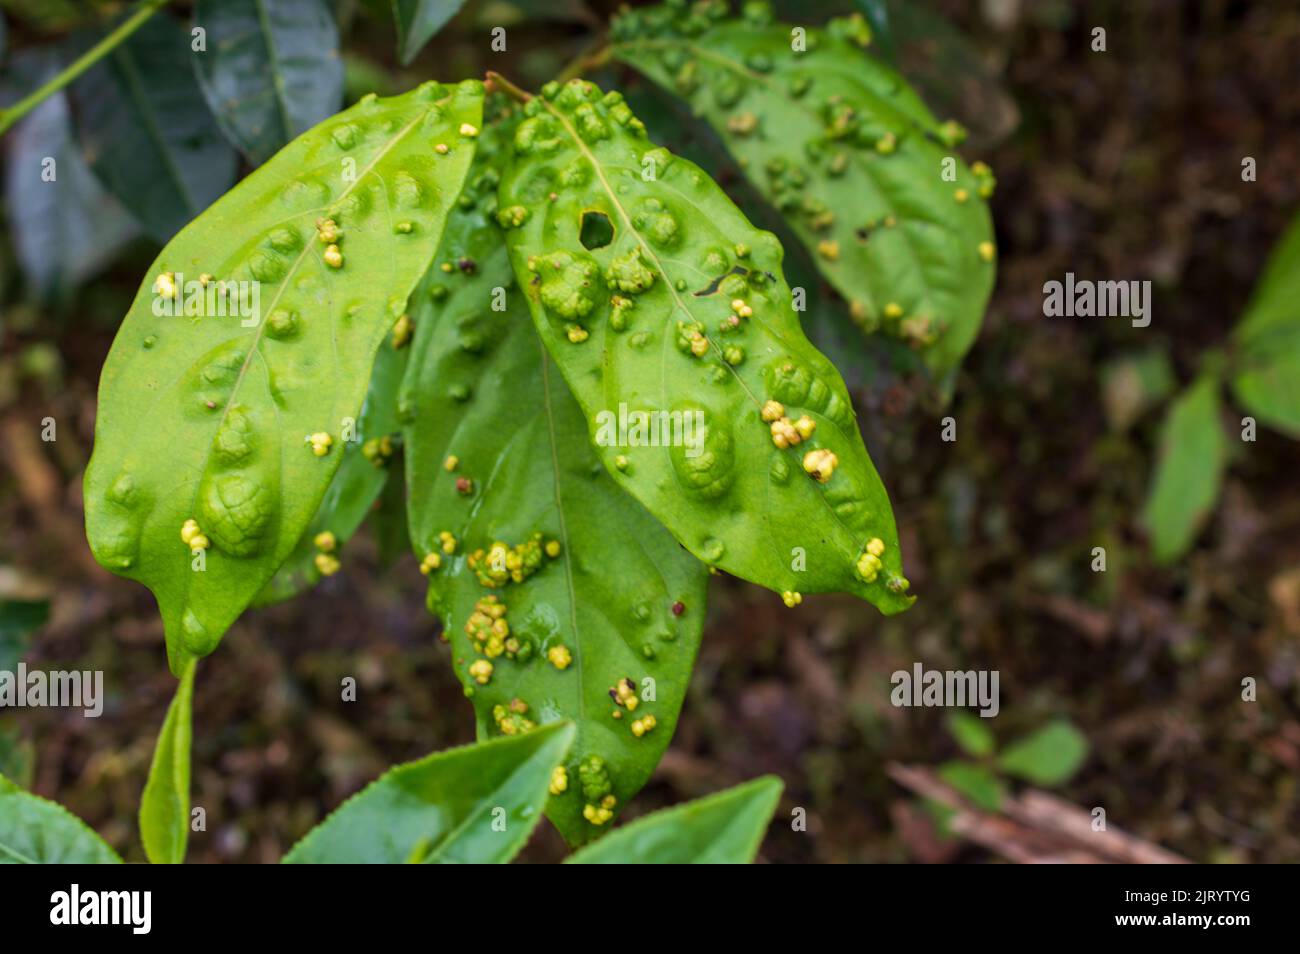 Infectious plant diseases are caused by living agents or pathogens. Here are some infected green leaves in focus. Stock Photo